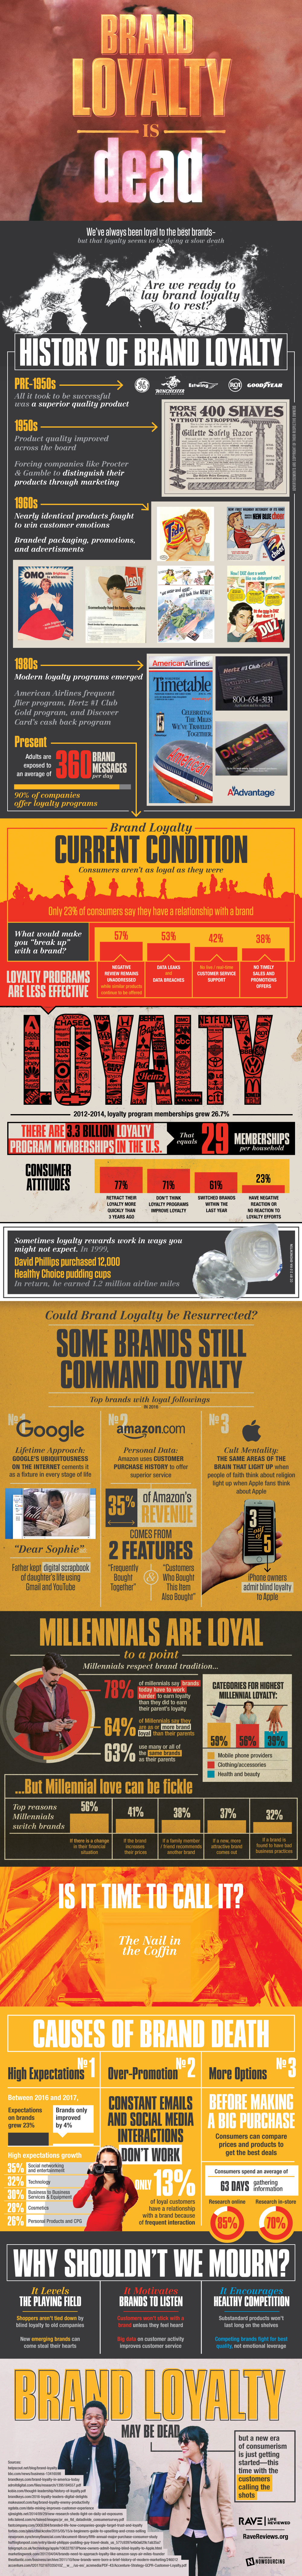 brand loyalty for small business owners